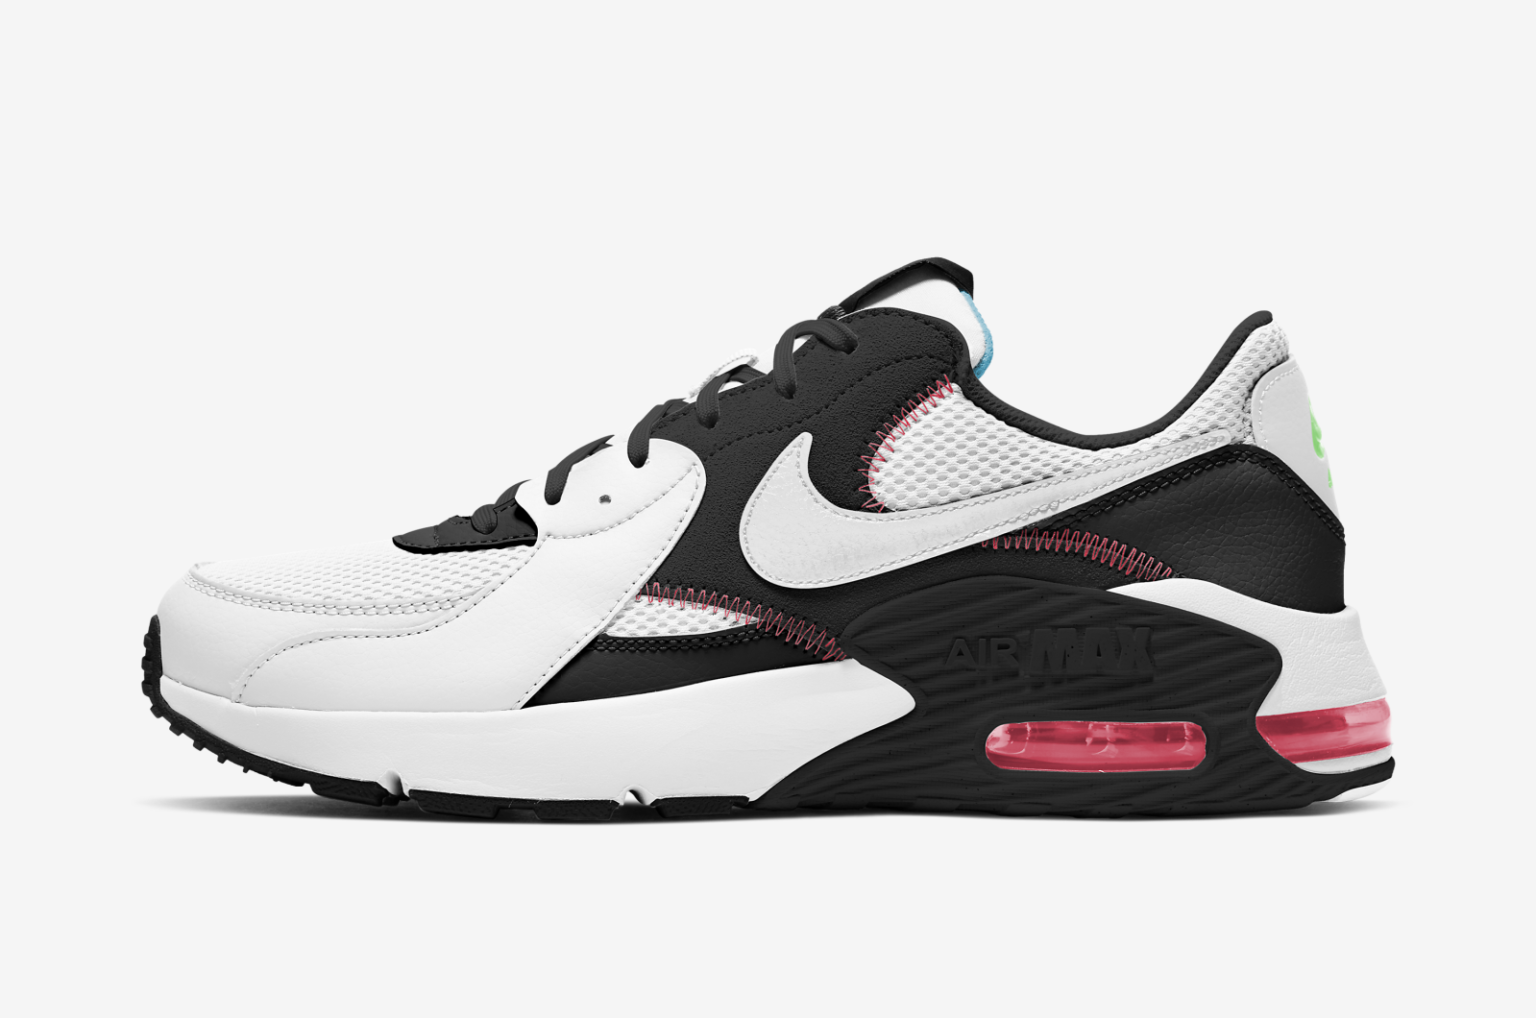 Nike Air Max Excee in White and Black with Pink Accents